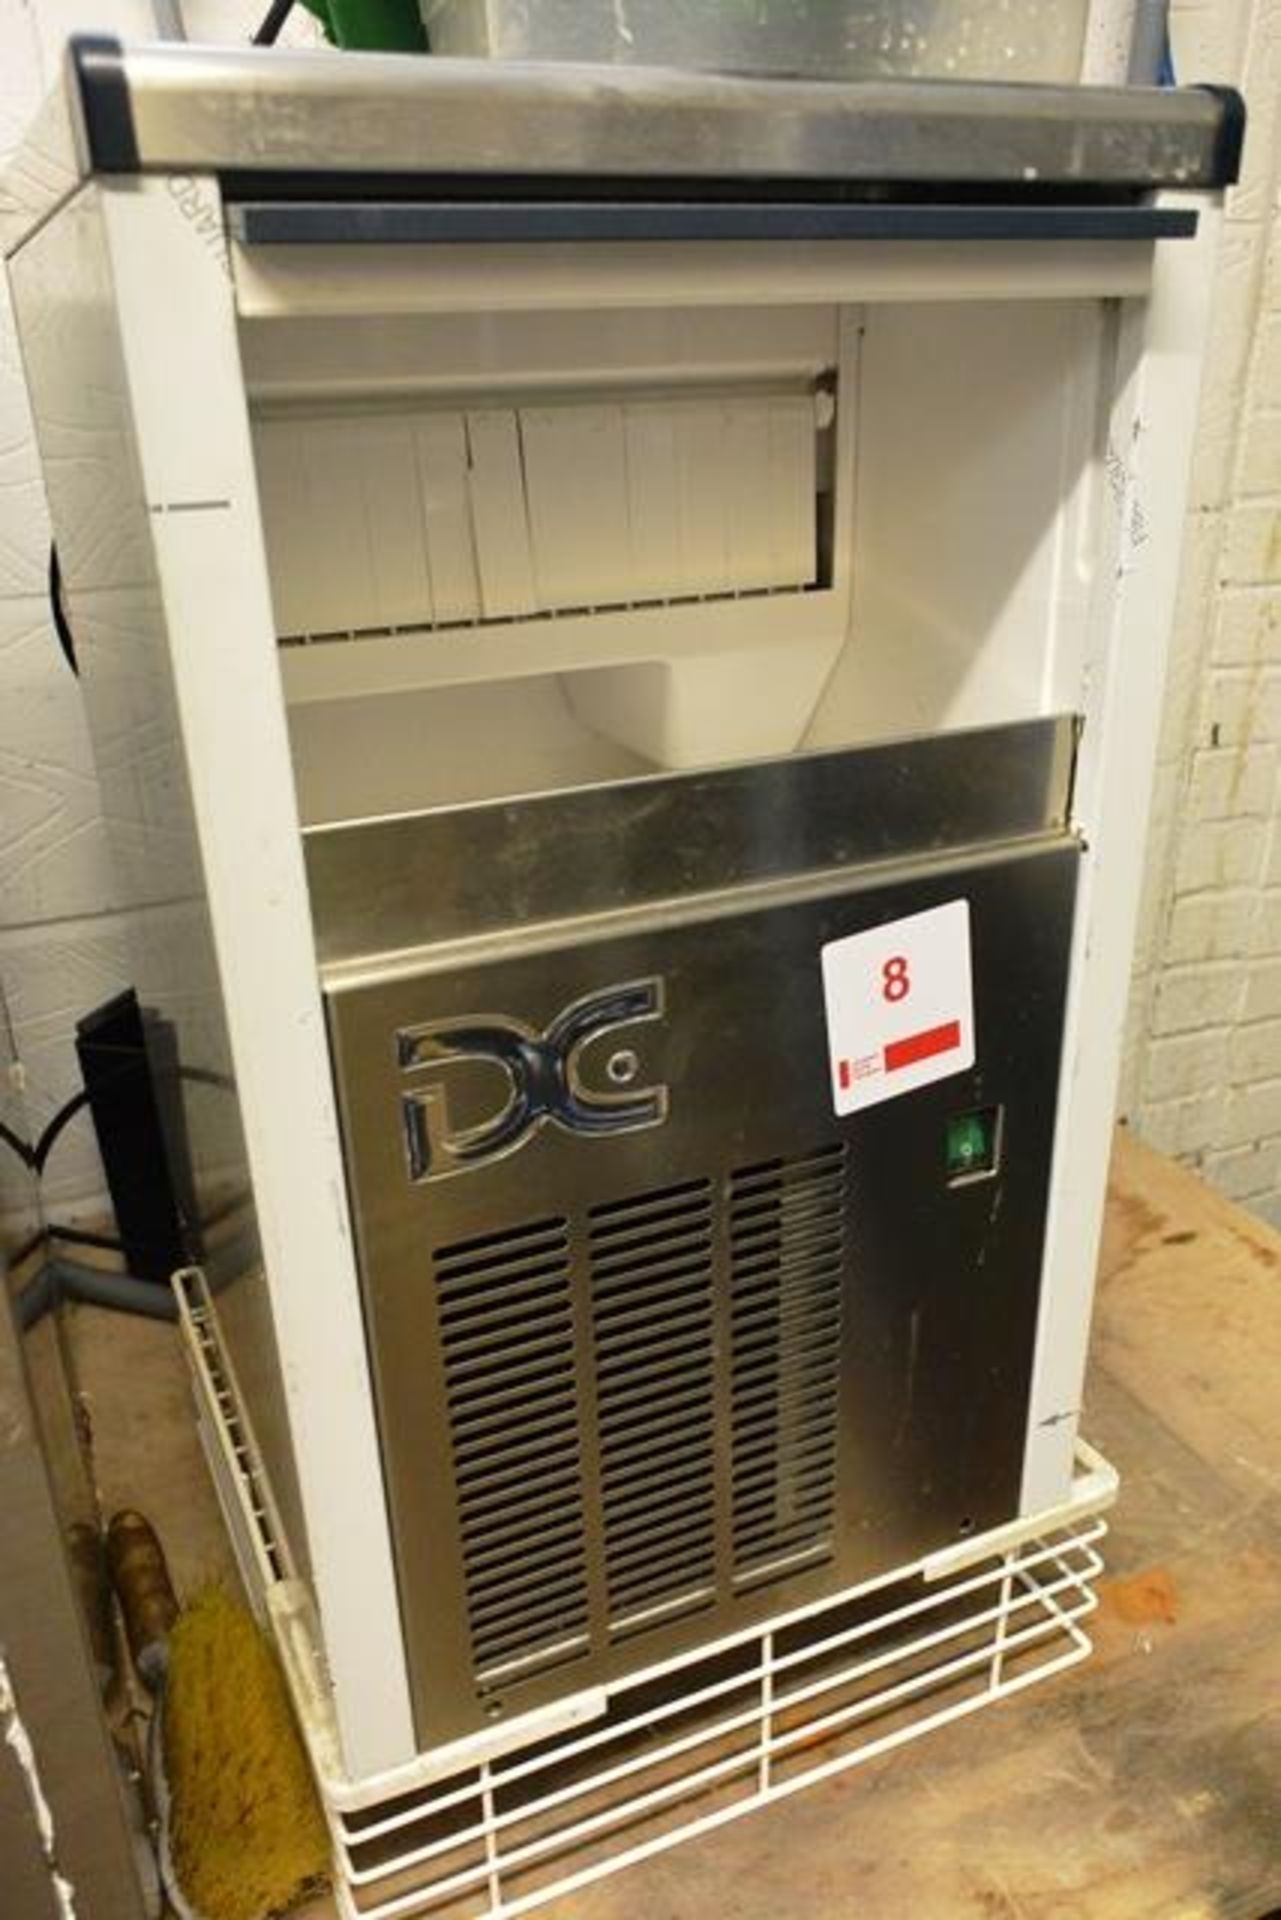 DC 20-4A stainless steel commercial ice machine, Nr. 2016090806491 (2016)